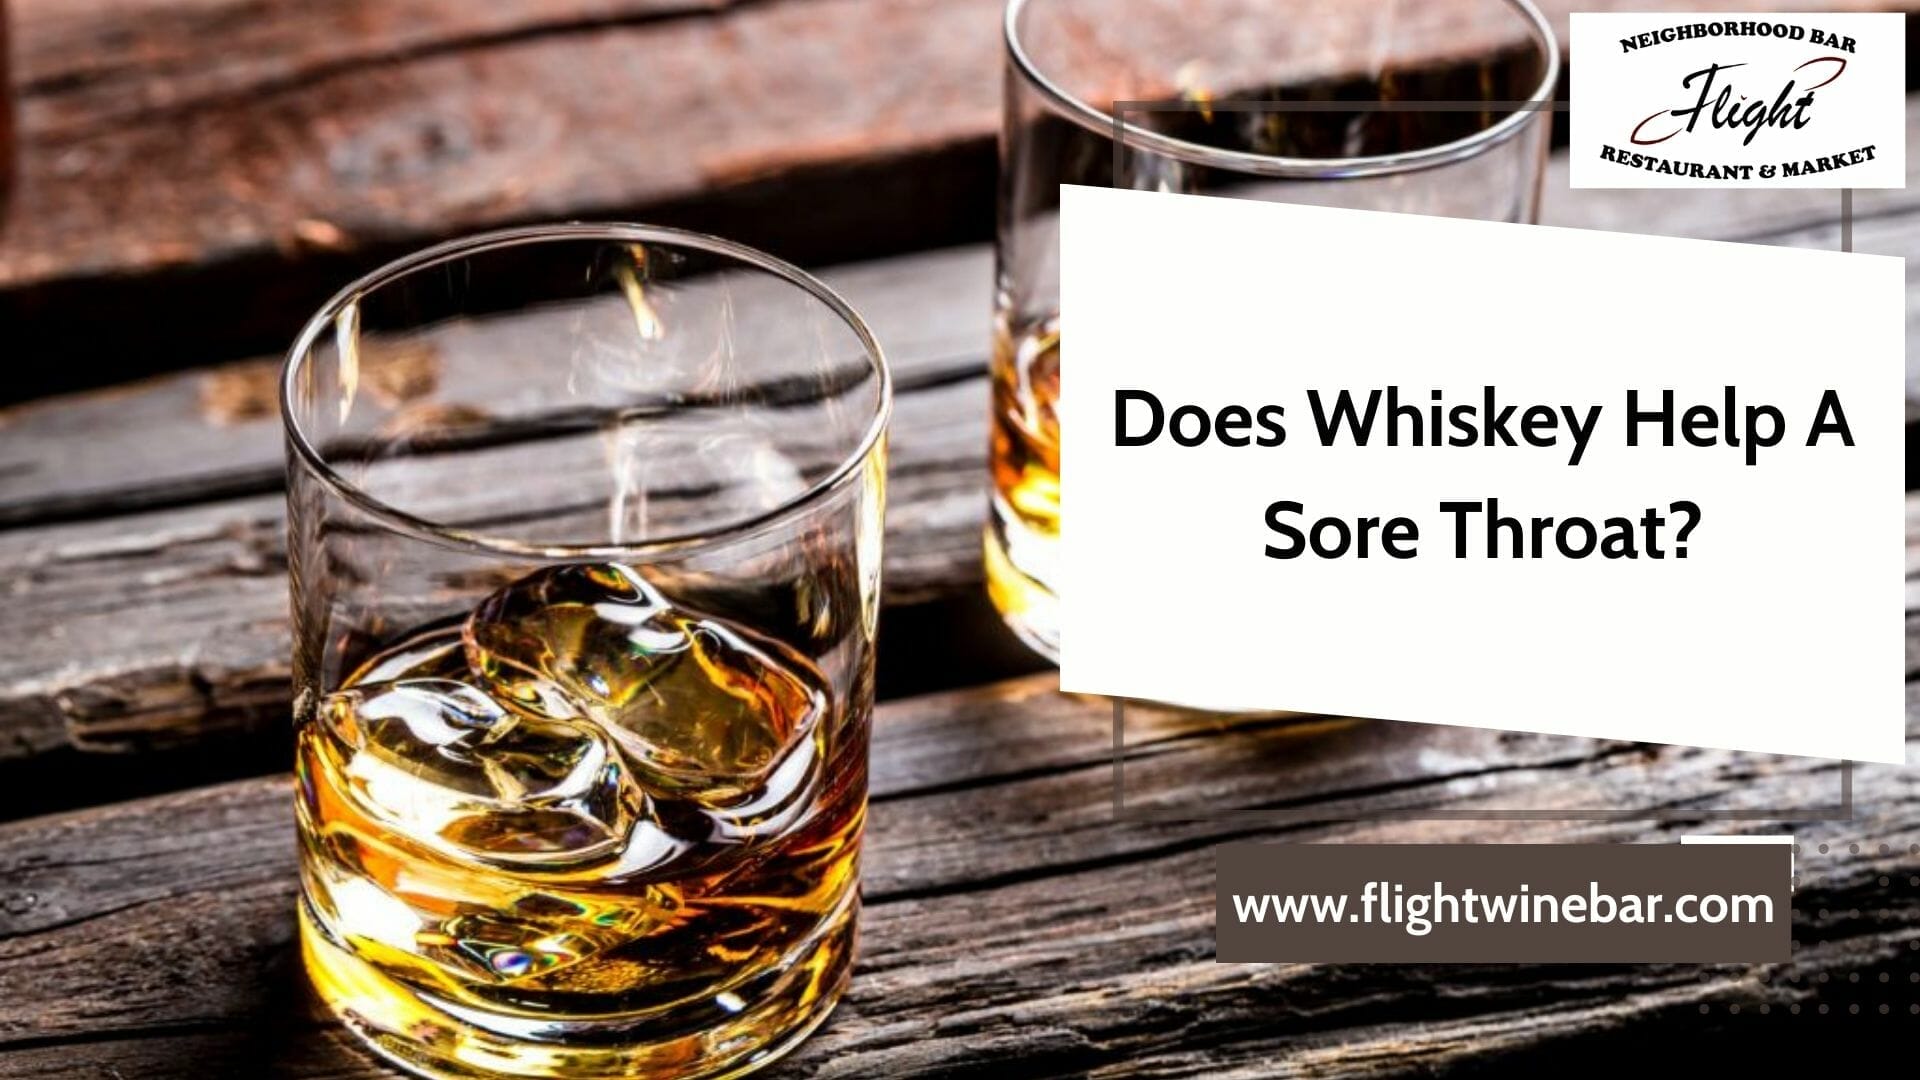 Does Whiskey Help A Sore Throat